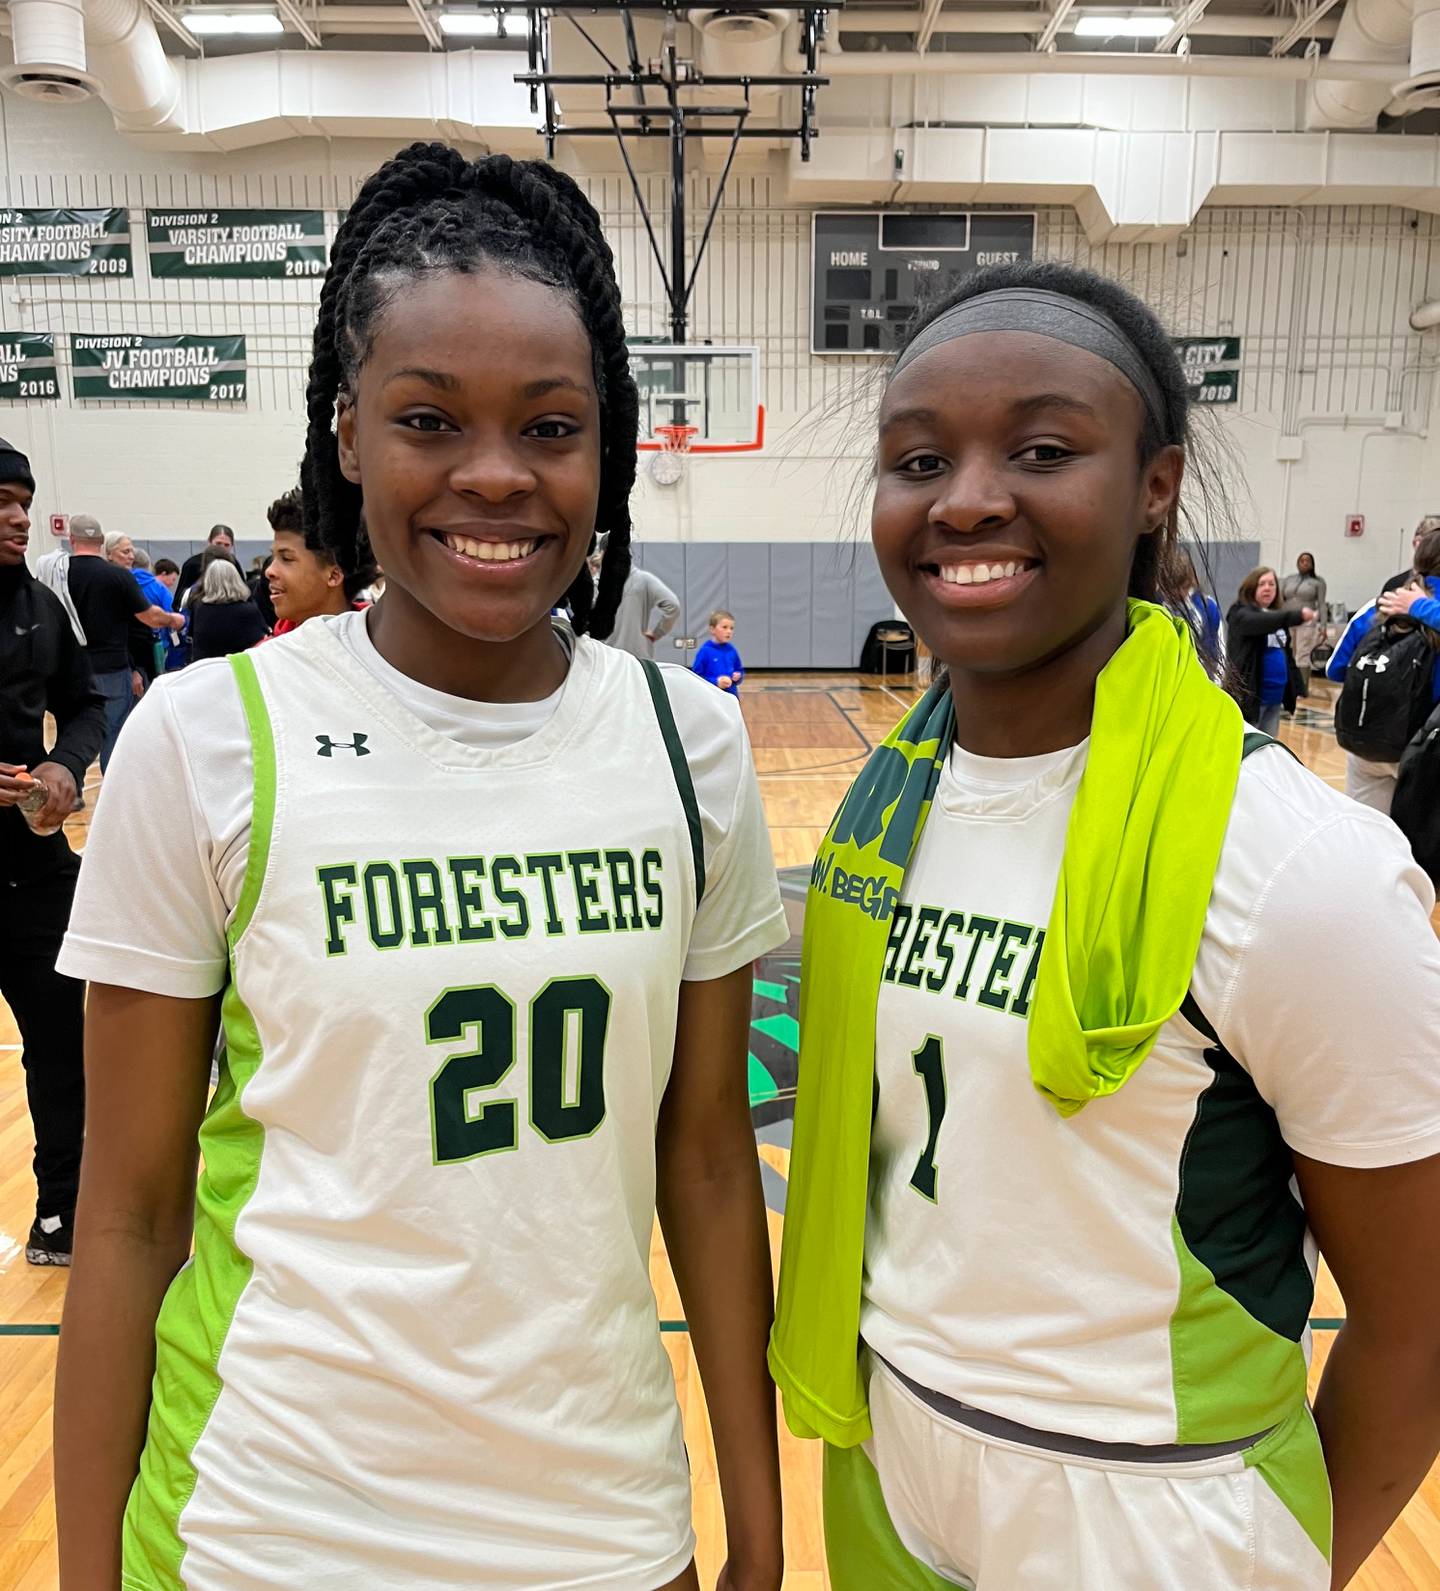 Chaniya Taylor (left) and Aliyah Carroll combine for 29 points Friday for Forest Park girls basketball team's victory over Boonsboro in the Class 1A state quarterfinals. The Foresters will play Snow Hill or Mountain Ridge in a state semifinal match Tuesday or Wednesday.